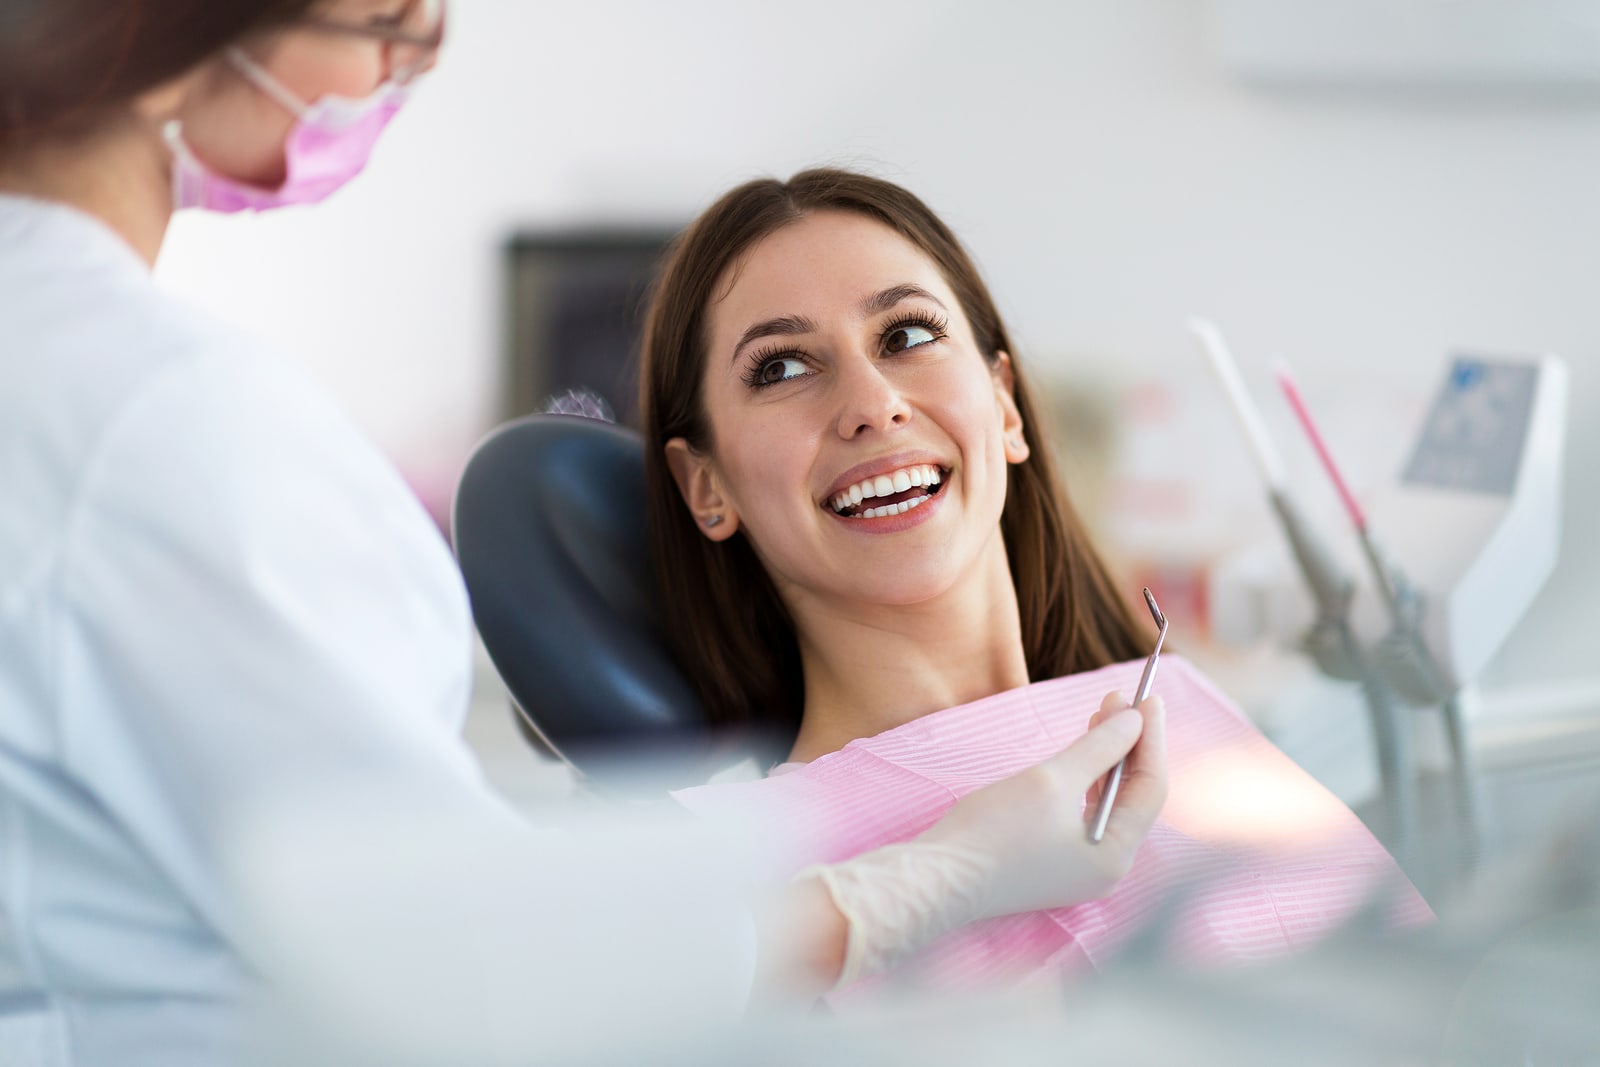 some things to consider when choosing restorative dentistry